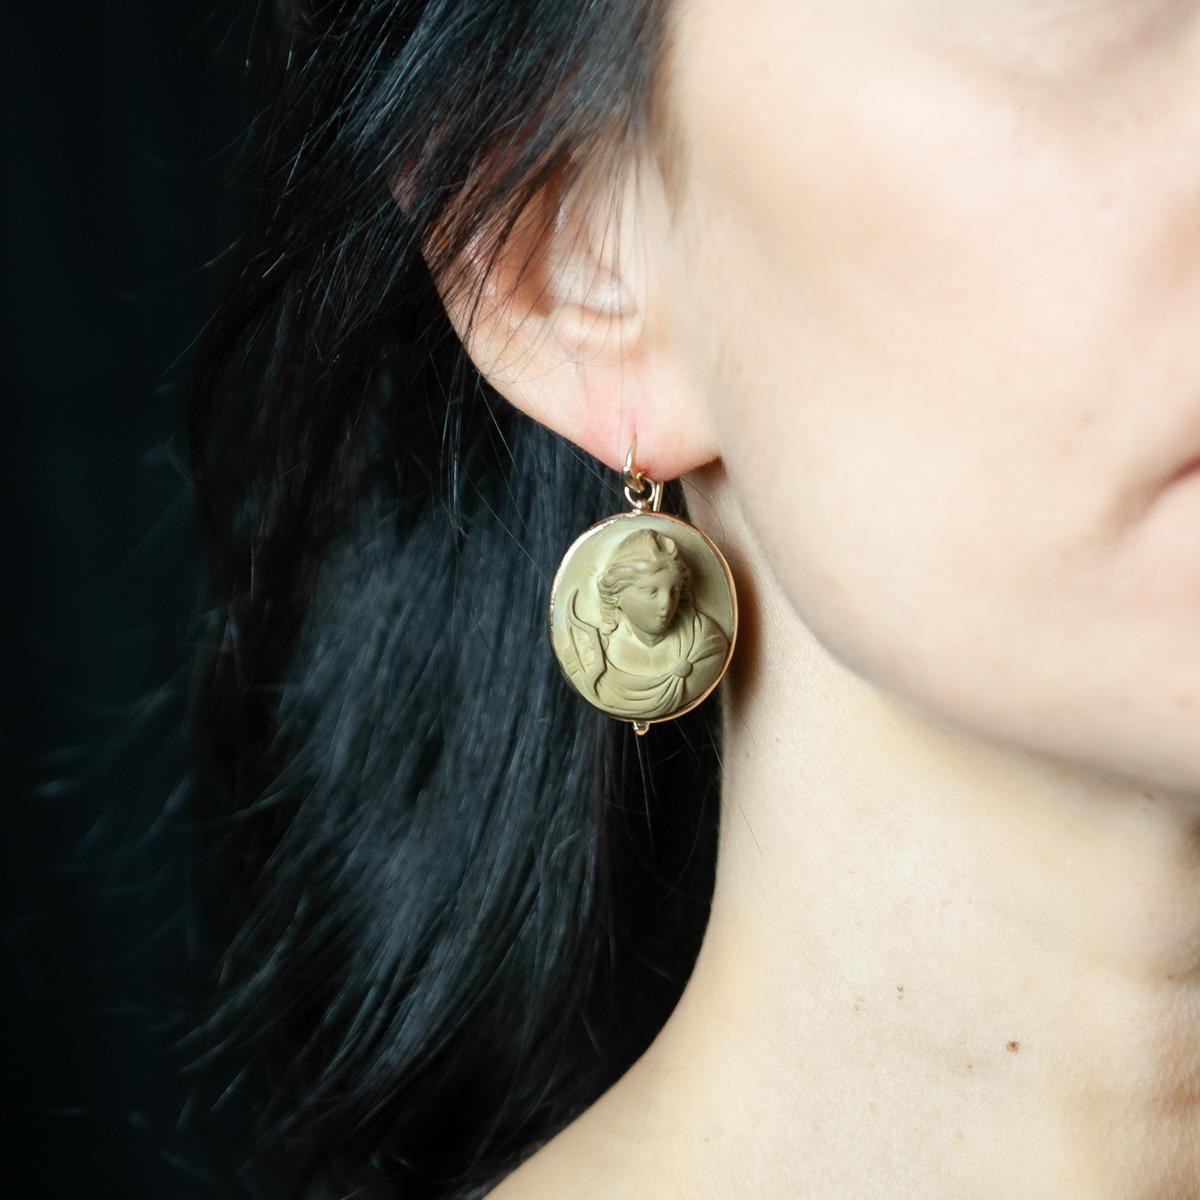 18 kt yellow gold earrings made in our workshop by Italian goldsmith masters, with 2 antique lava stone cameos plaques from around 1890, depicting two ladies with collected hair and jewels.
An ancient jewel is much more than its intrinsic value, in